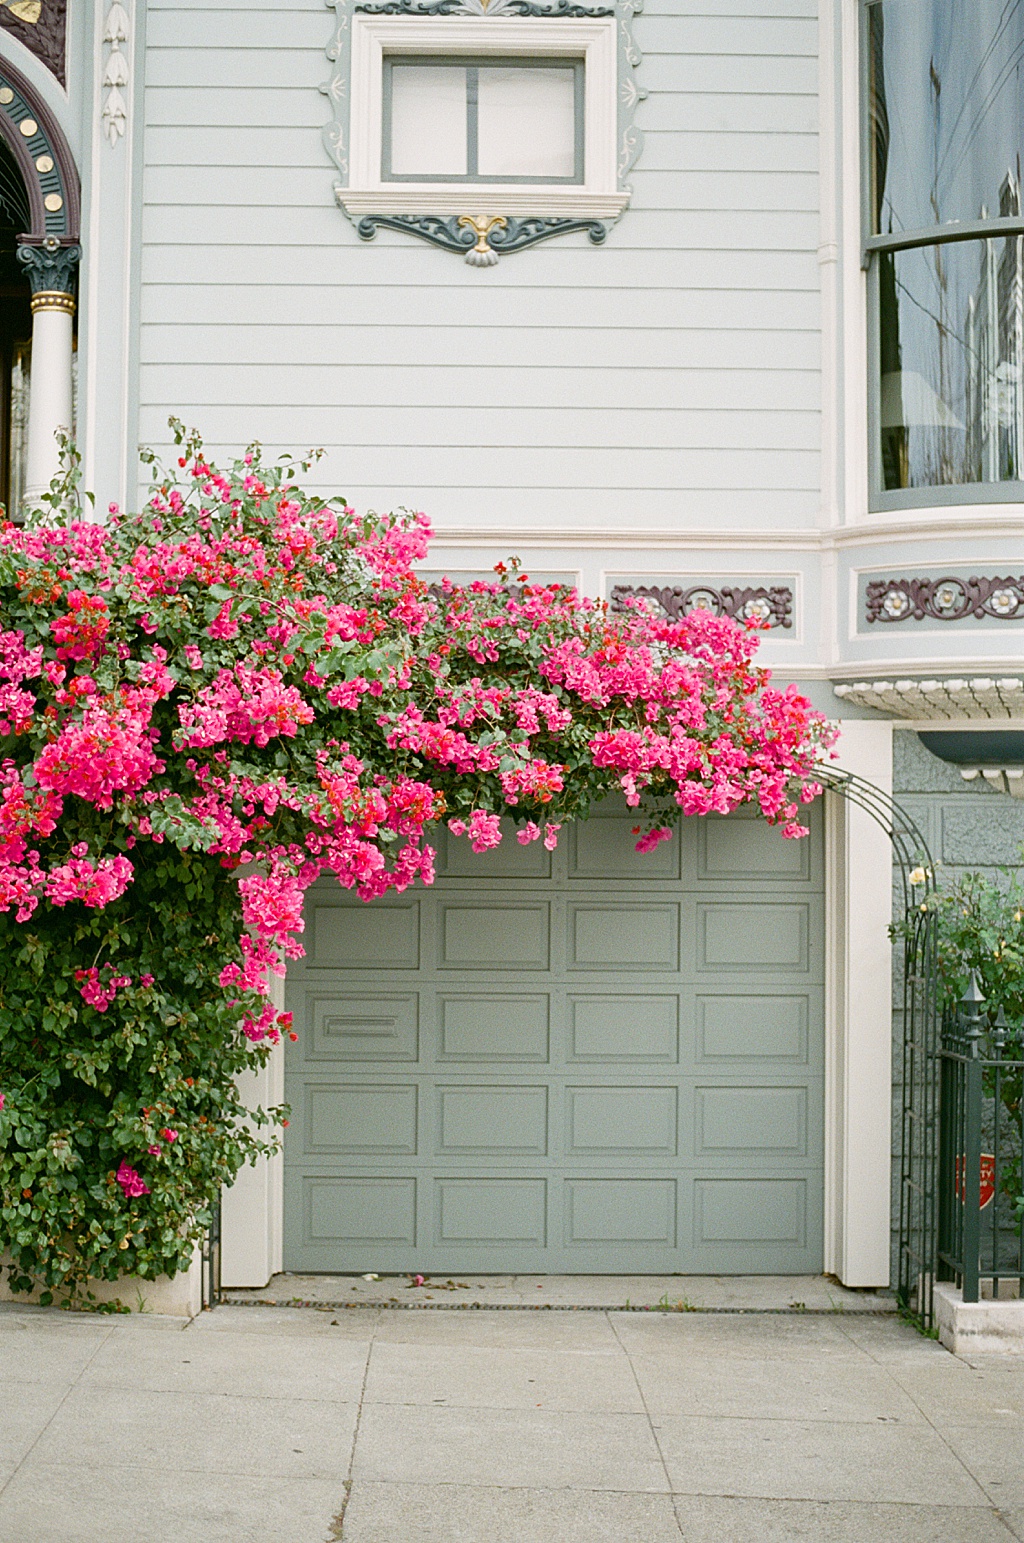 A cascade of magenta bougainvillea flowers over a powder sea green garage in San Francisco's Pacific Heights neighborhood on Divisadero Street.